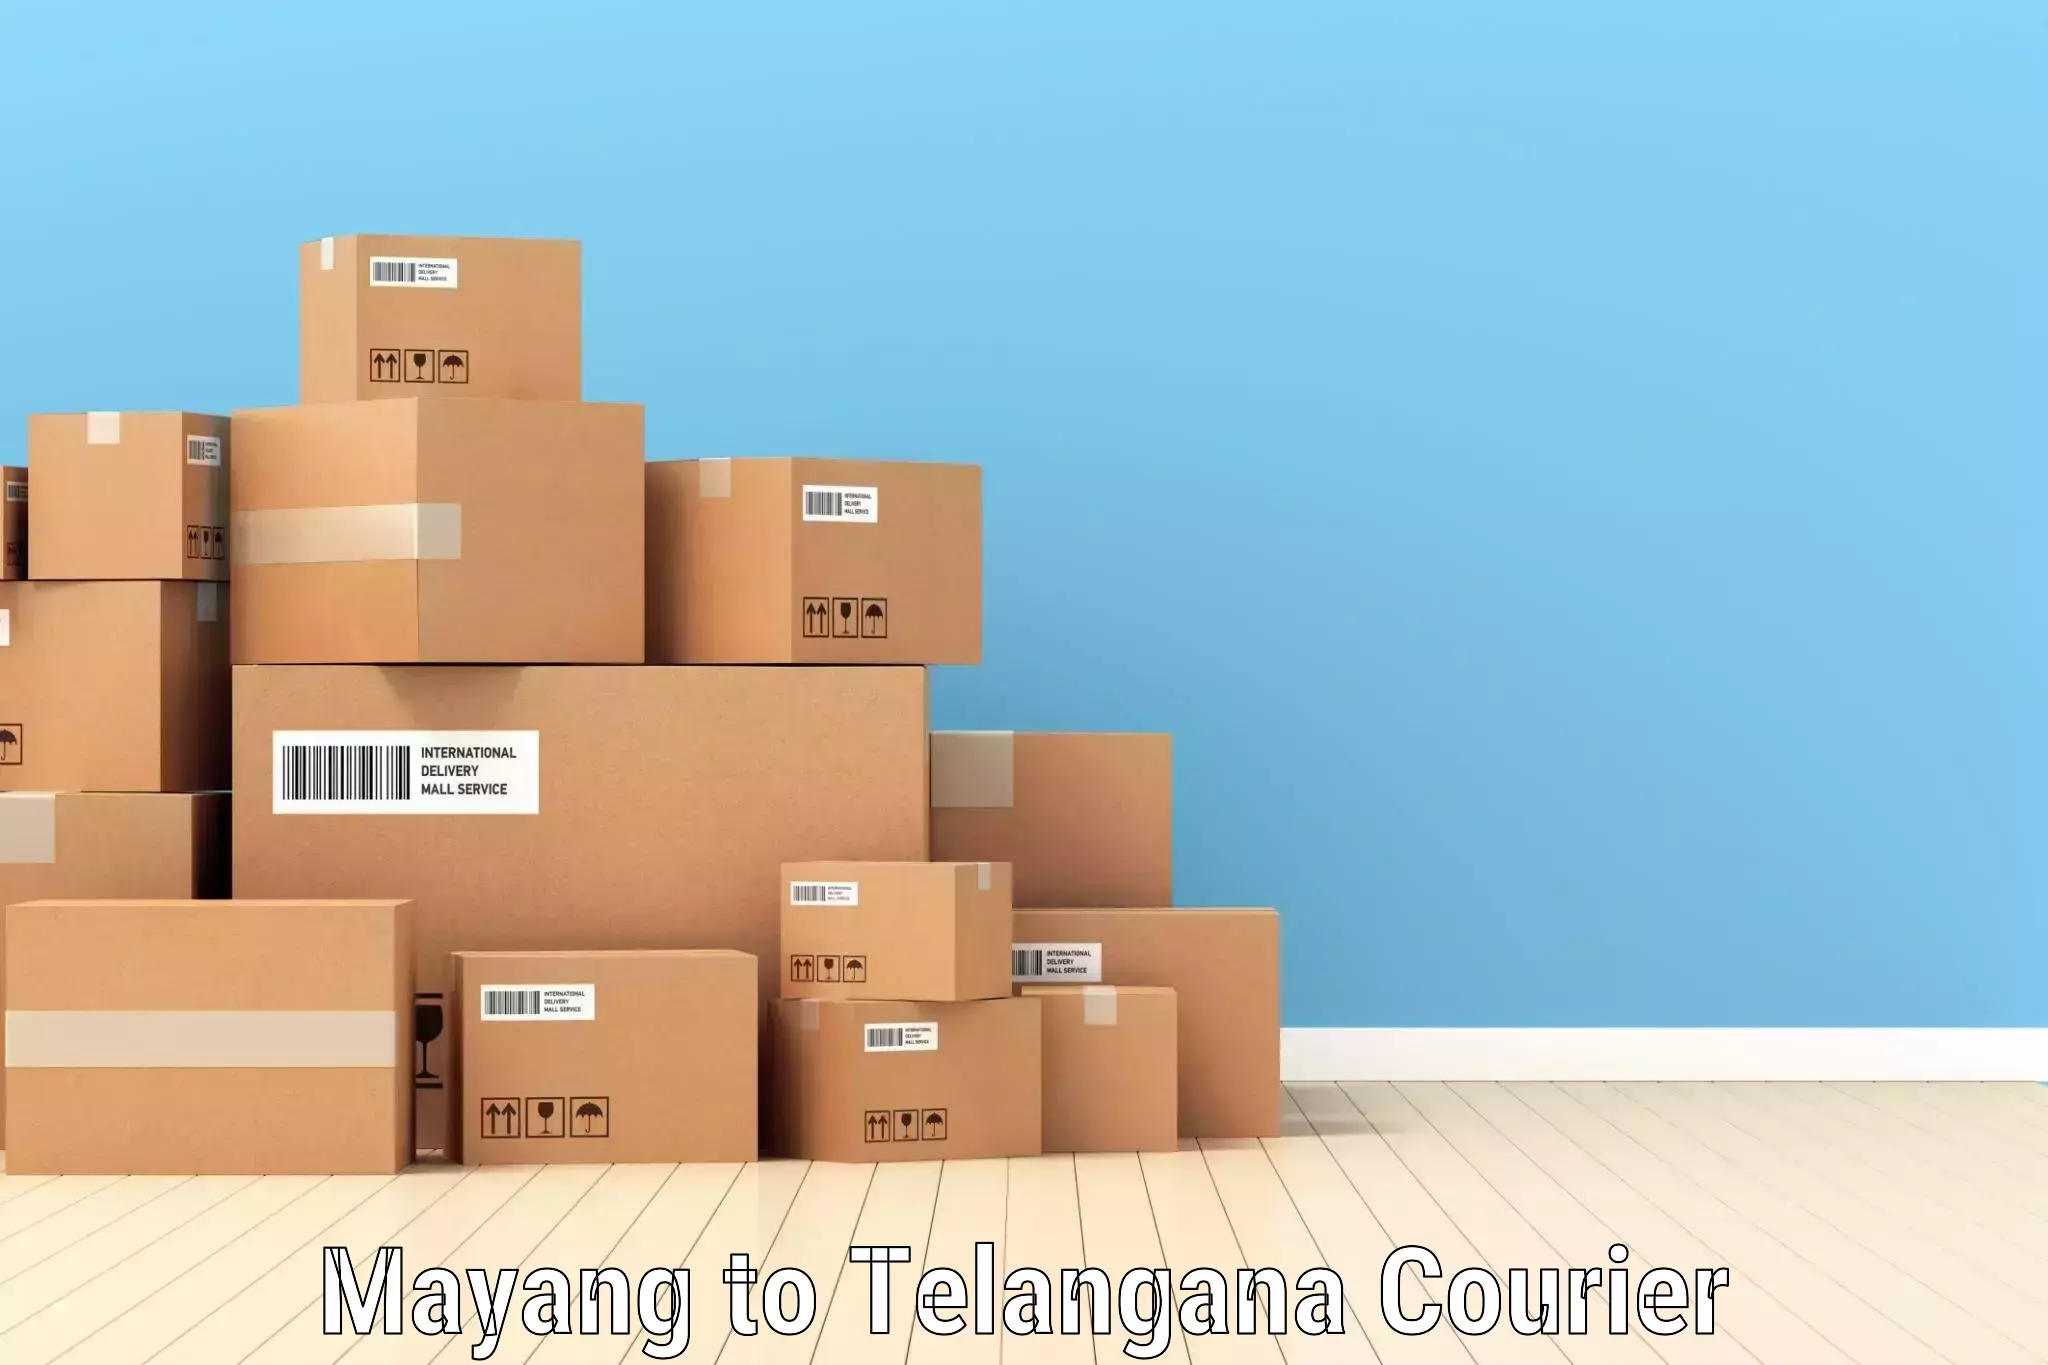 Courier service comparison Mayang to Hyderabad